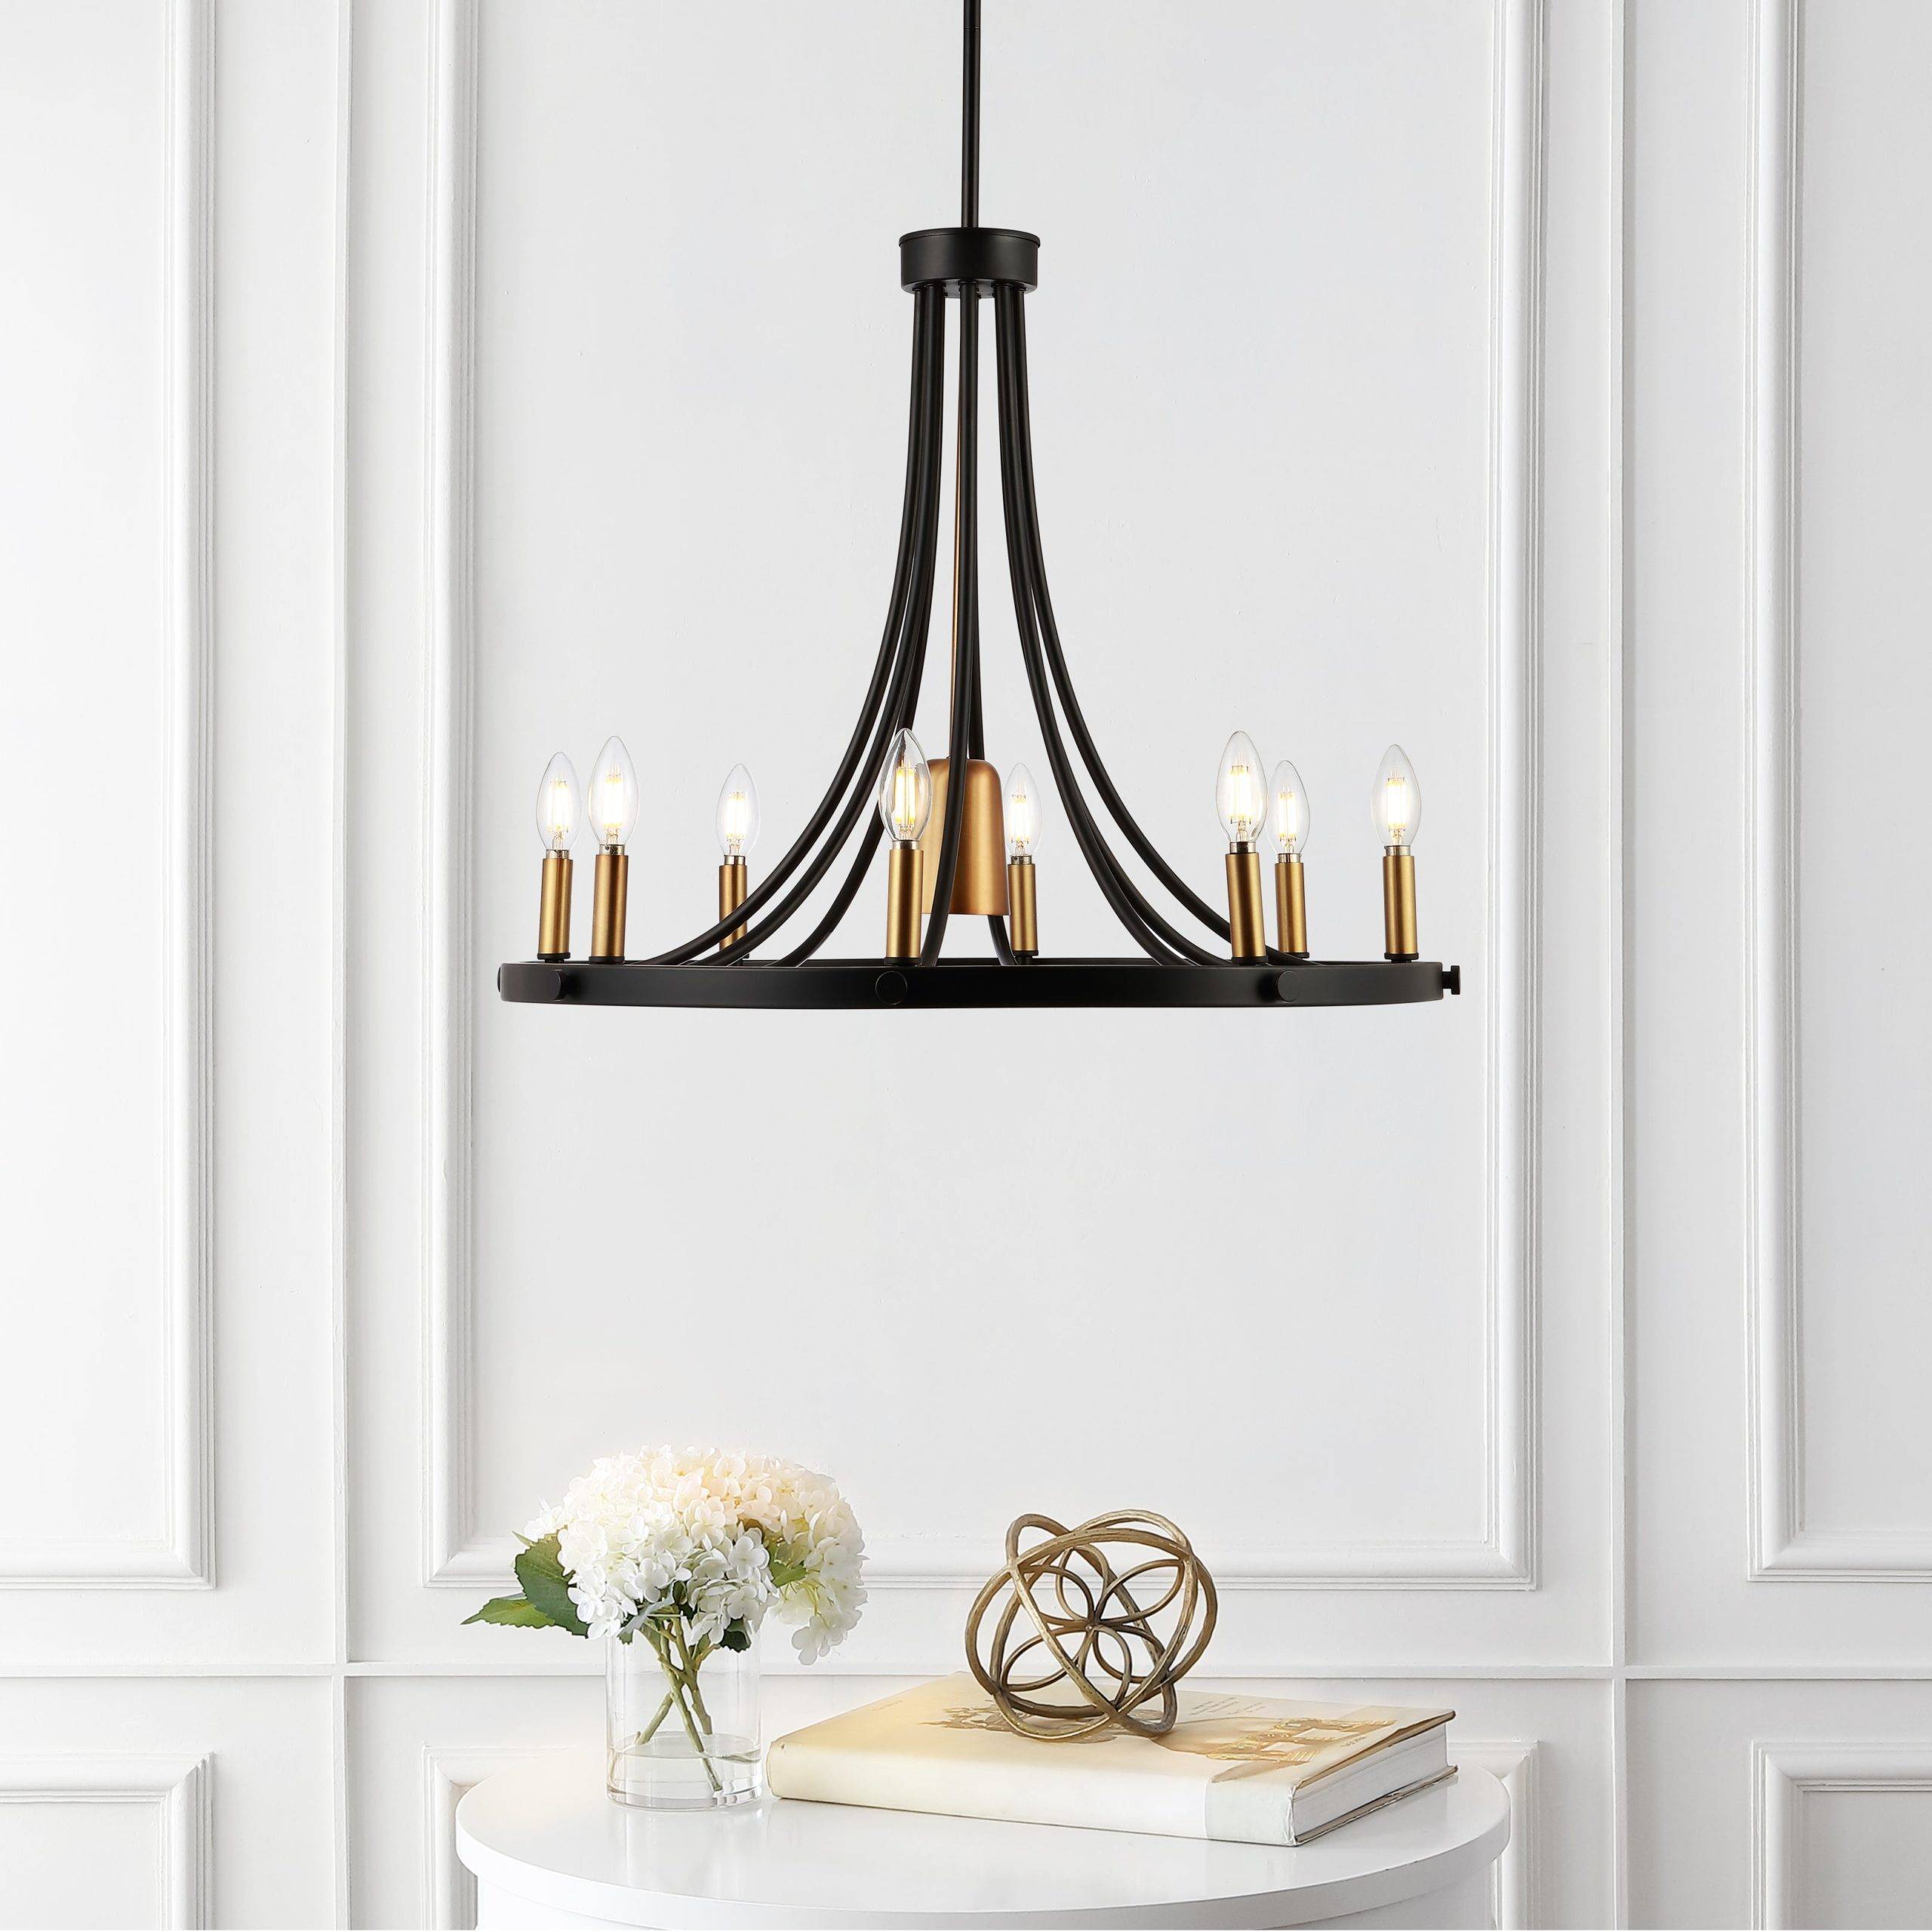 Stylish Light Fixtures That Are Sure to Make a Statement